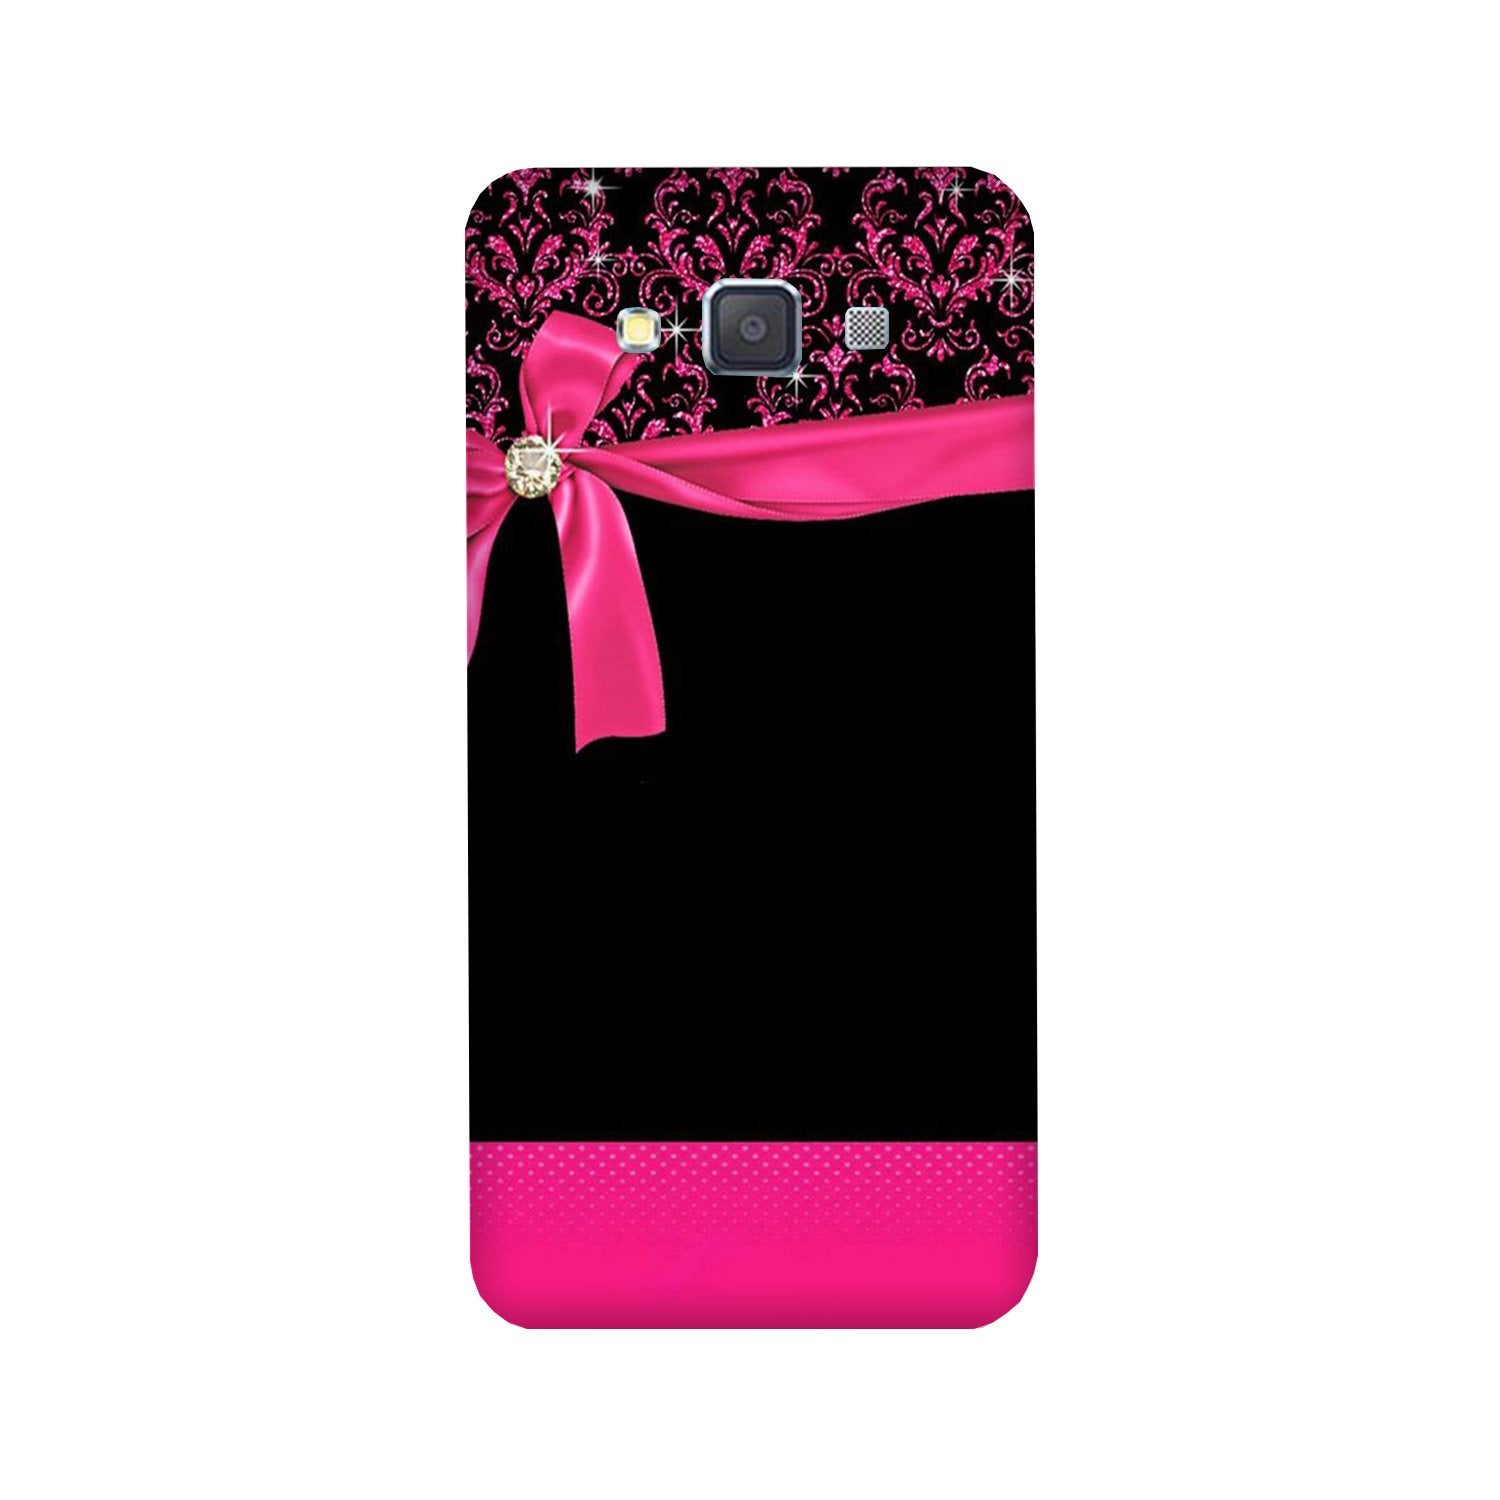 Gift Wrap4 Case for Galaxy Grand Prime